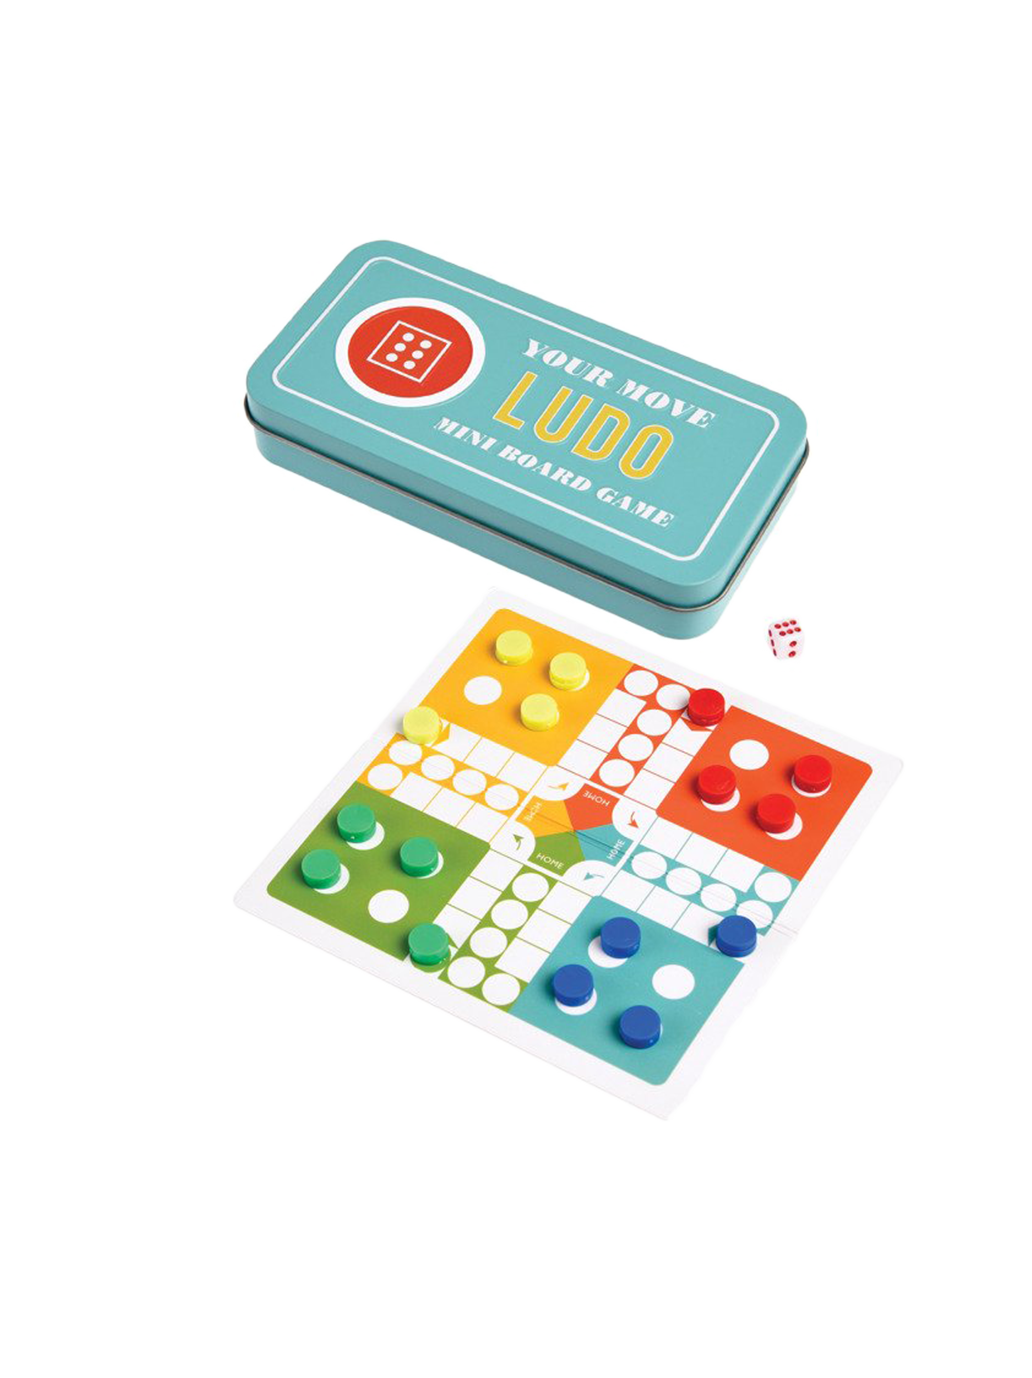 Traveling magnetic game Ludo Chinese